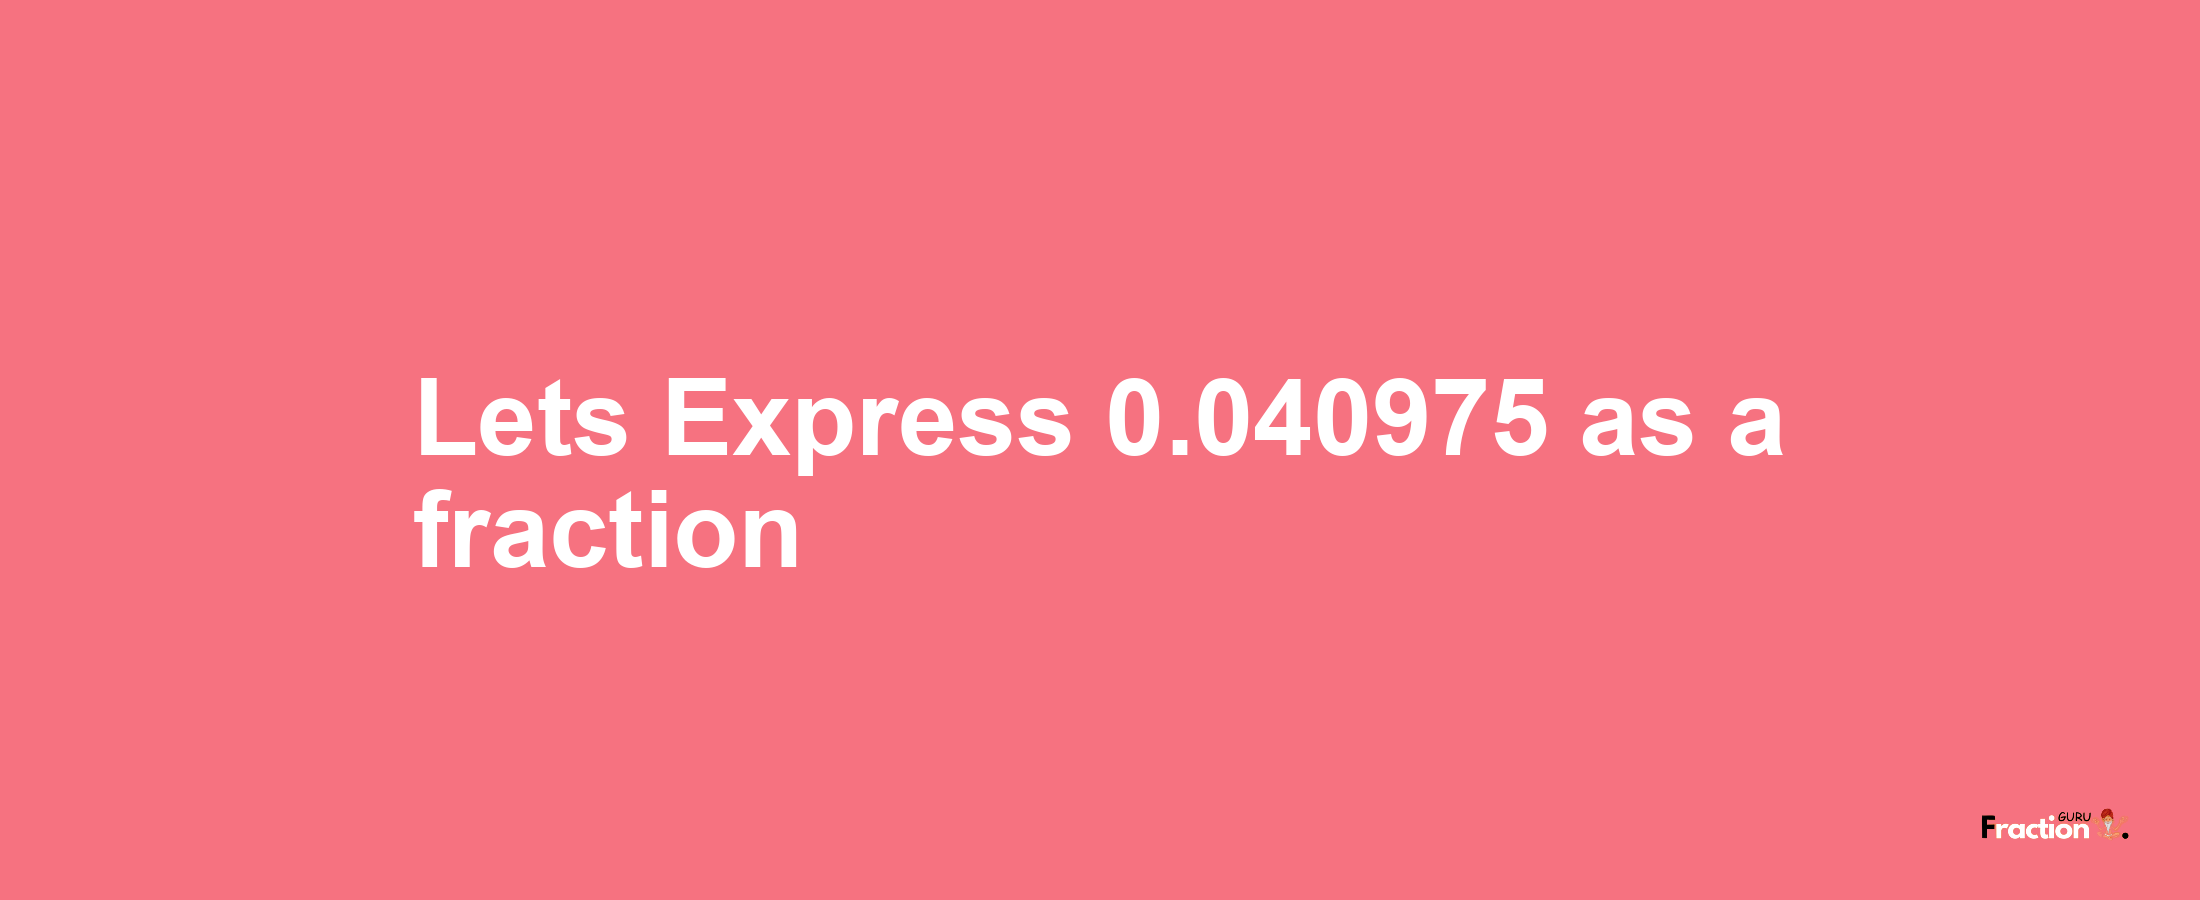 Lets Express 0.040975 as afraction